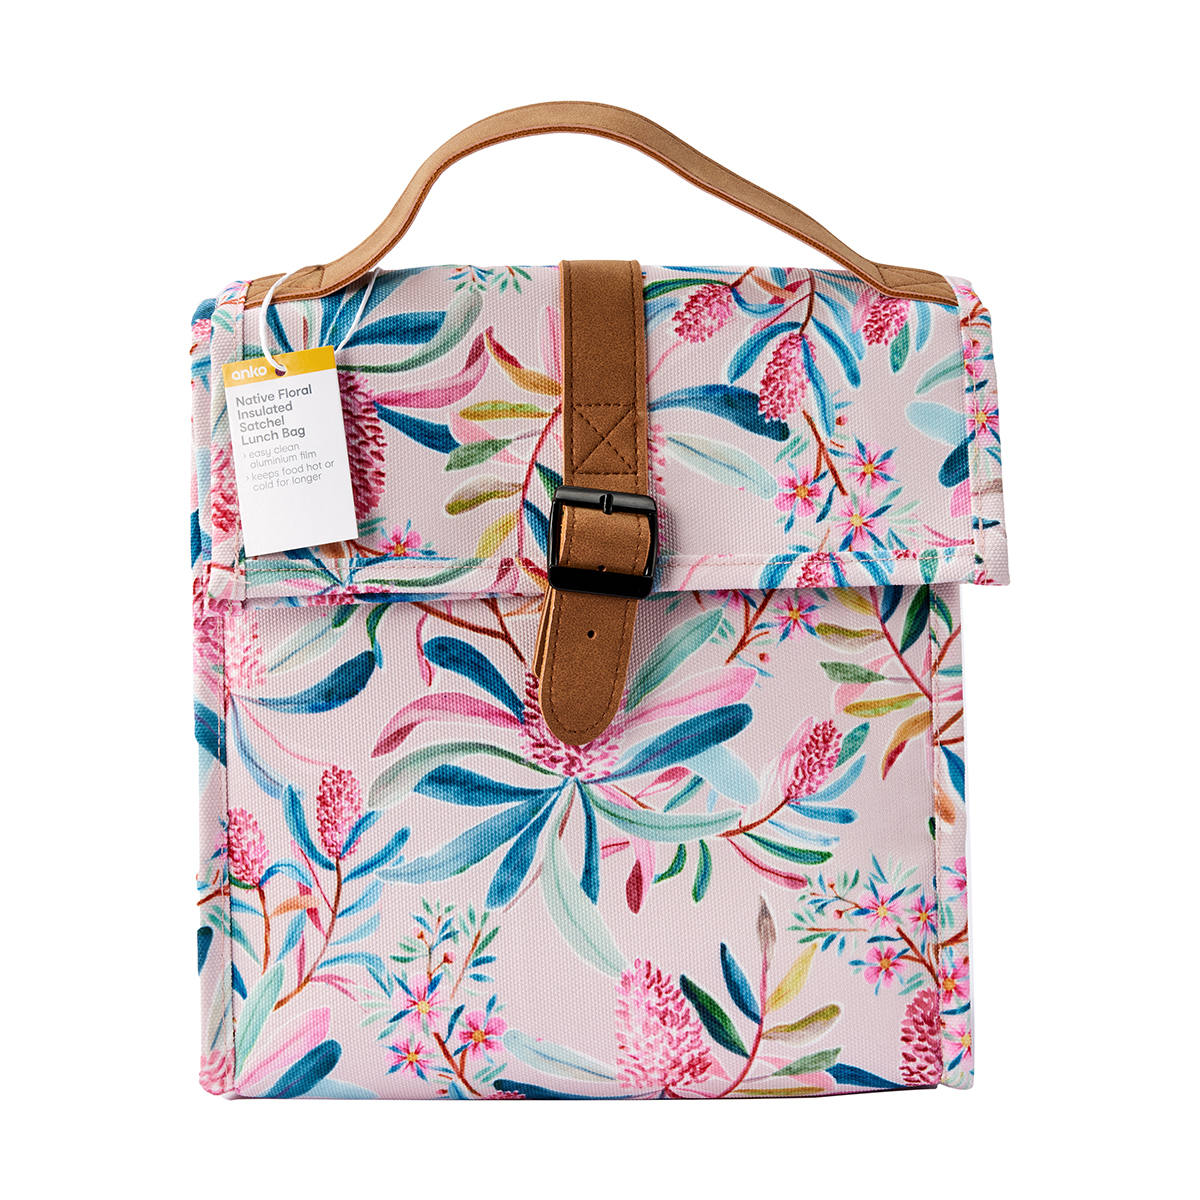 Native Floral Insulated Satchel Lunch Bag - Kmart